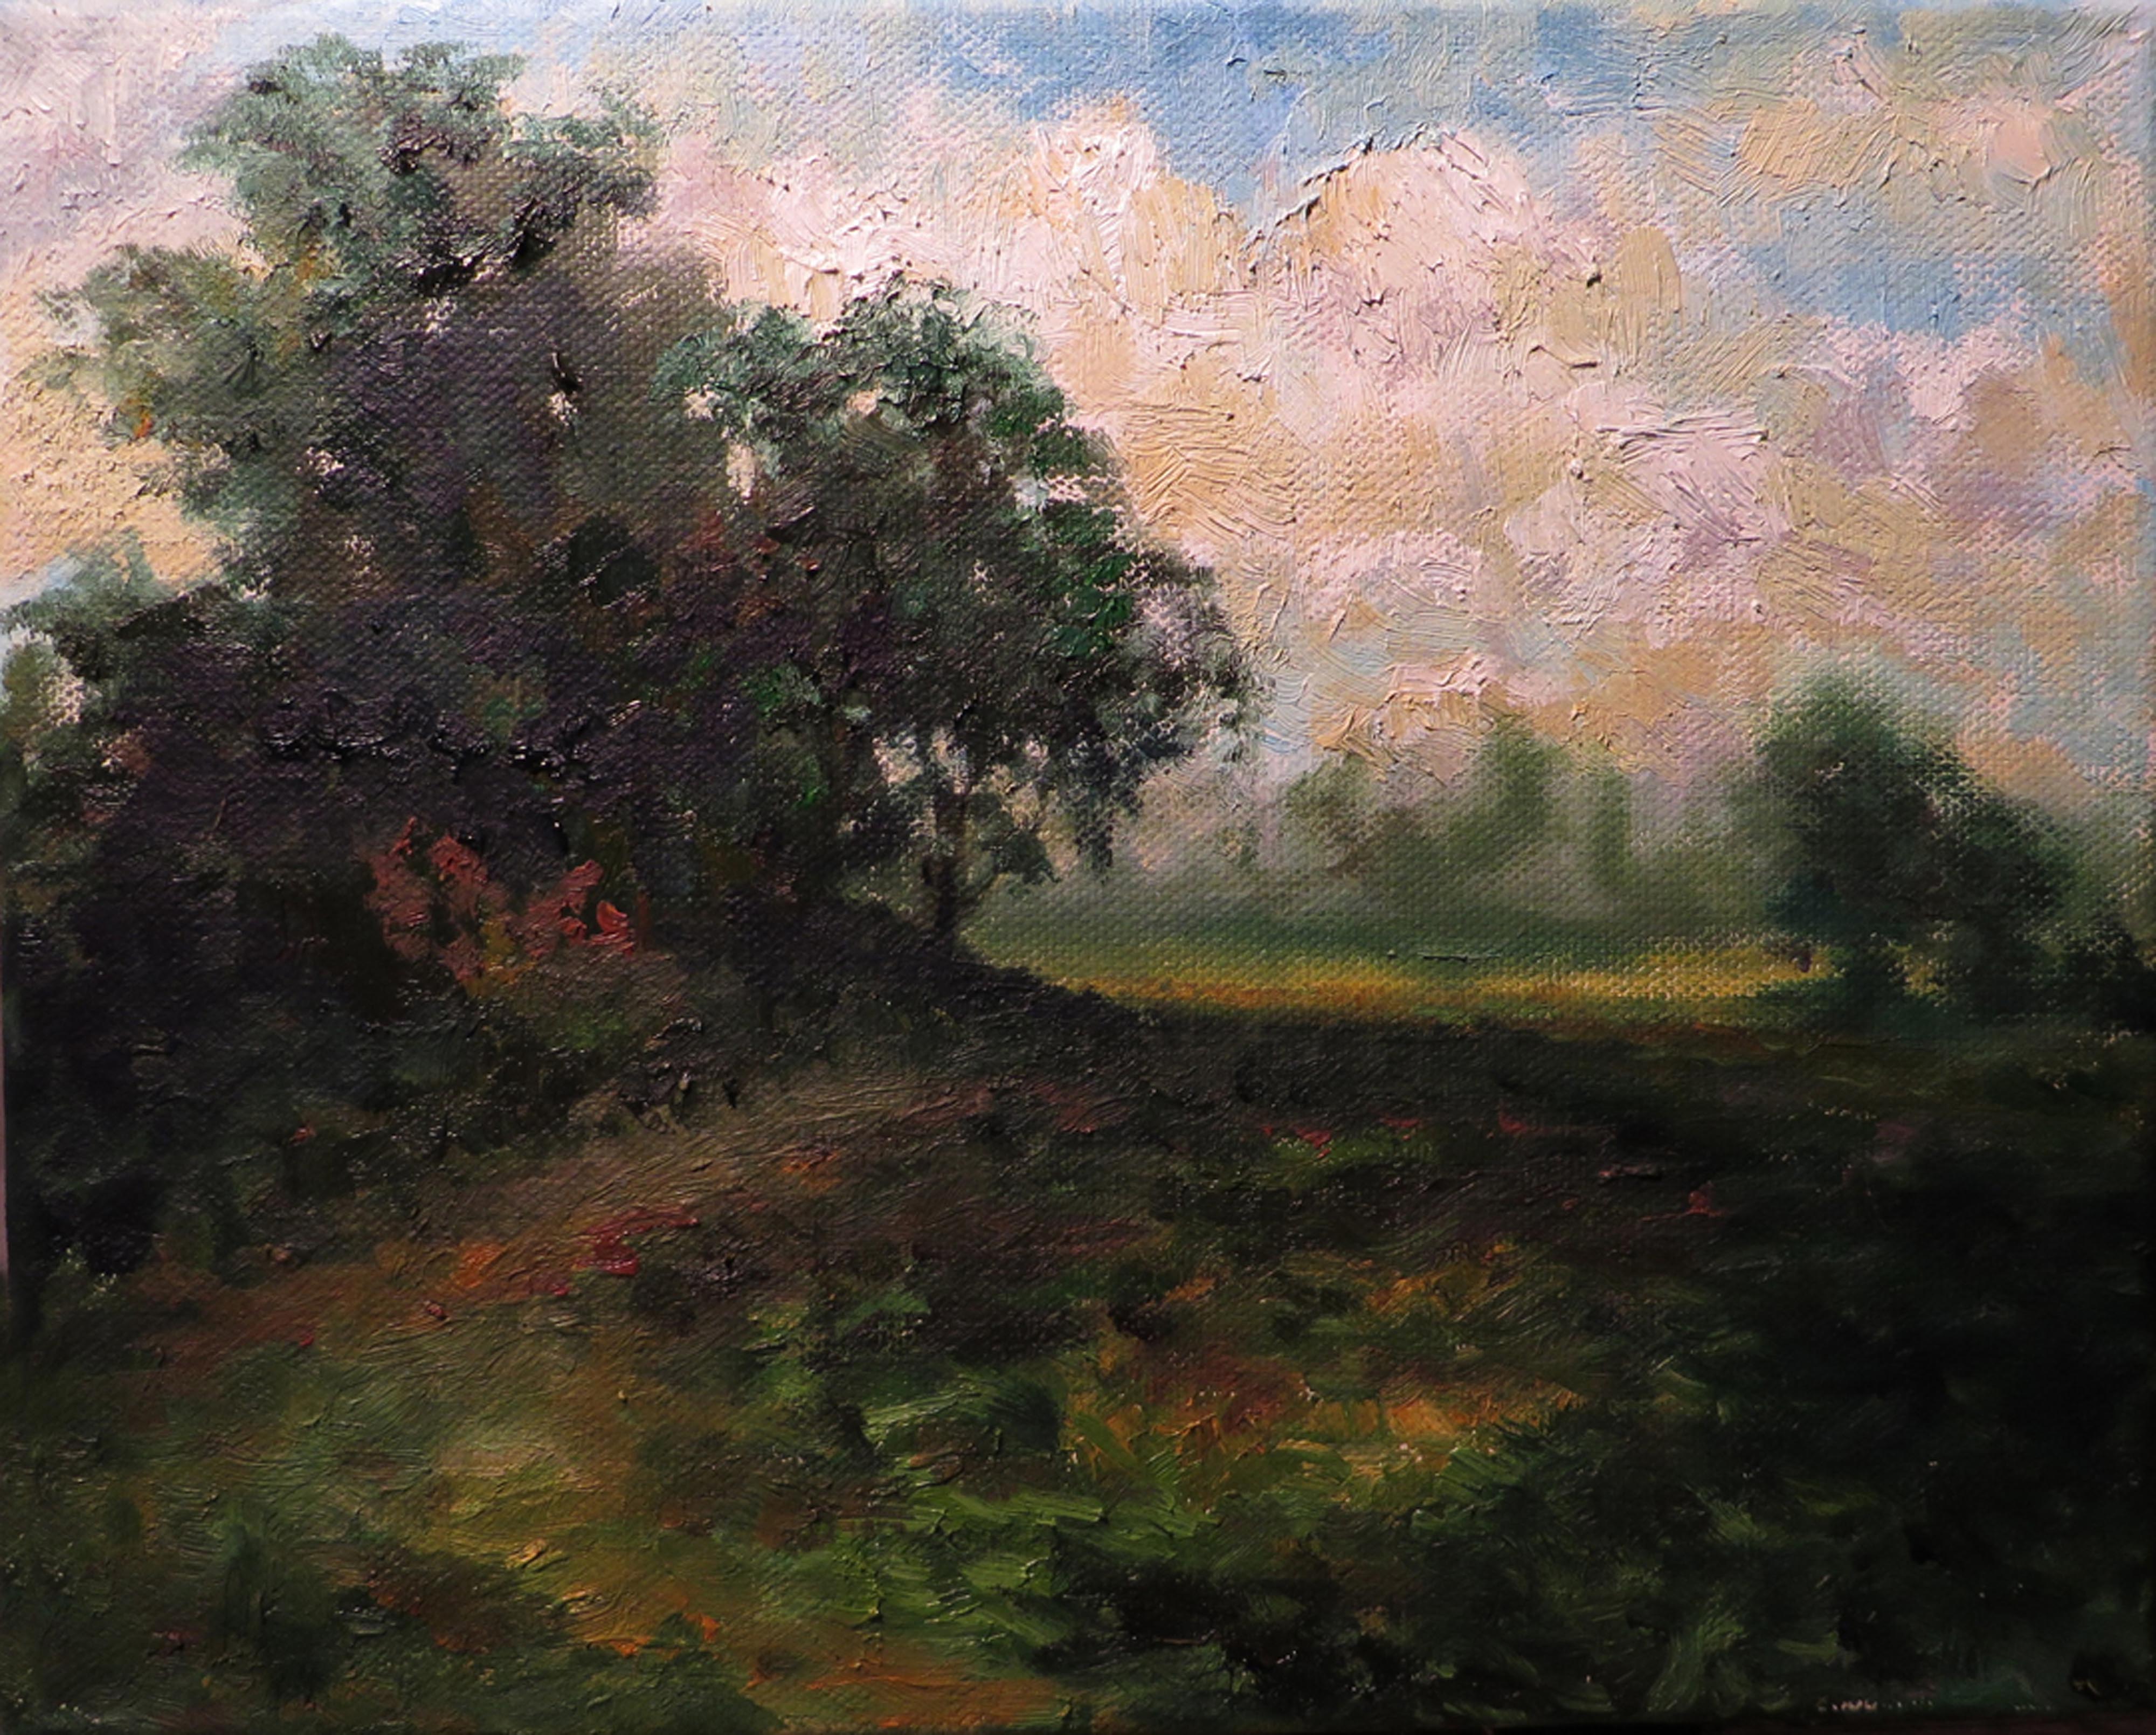 Getting Dark, oil on canvas by Frank Stock